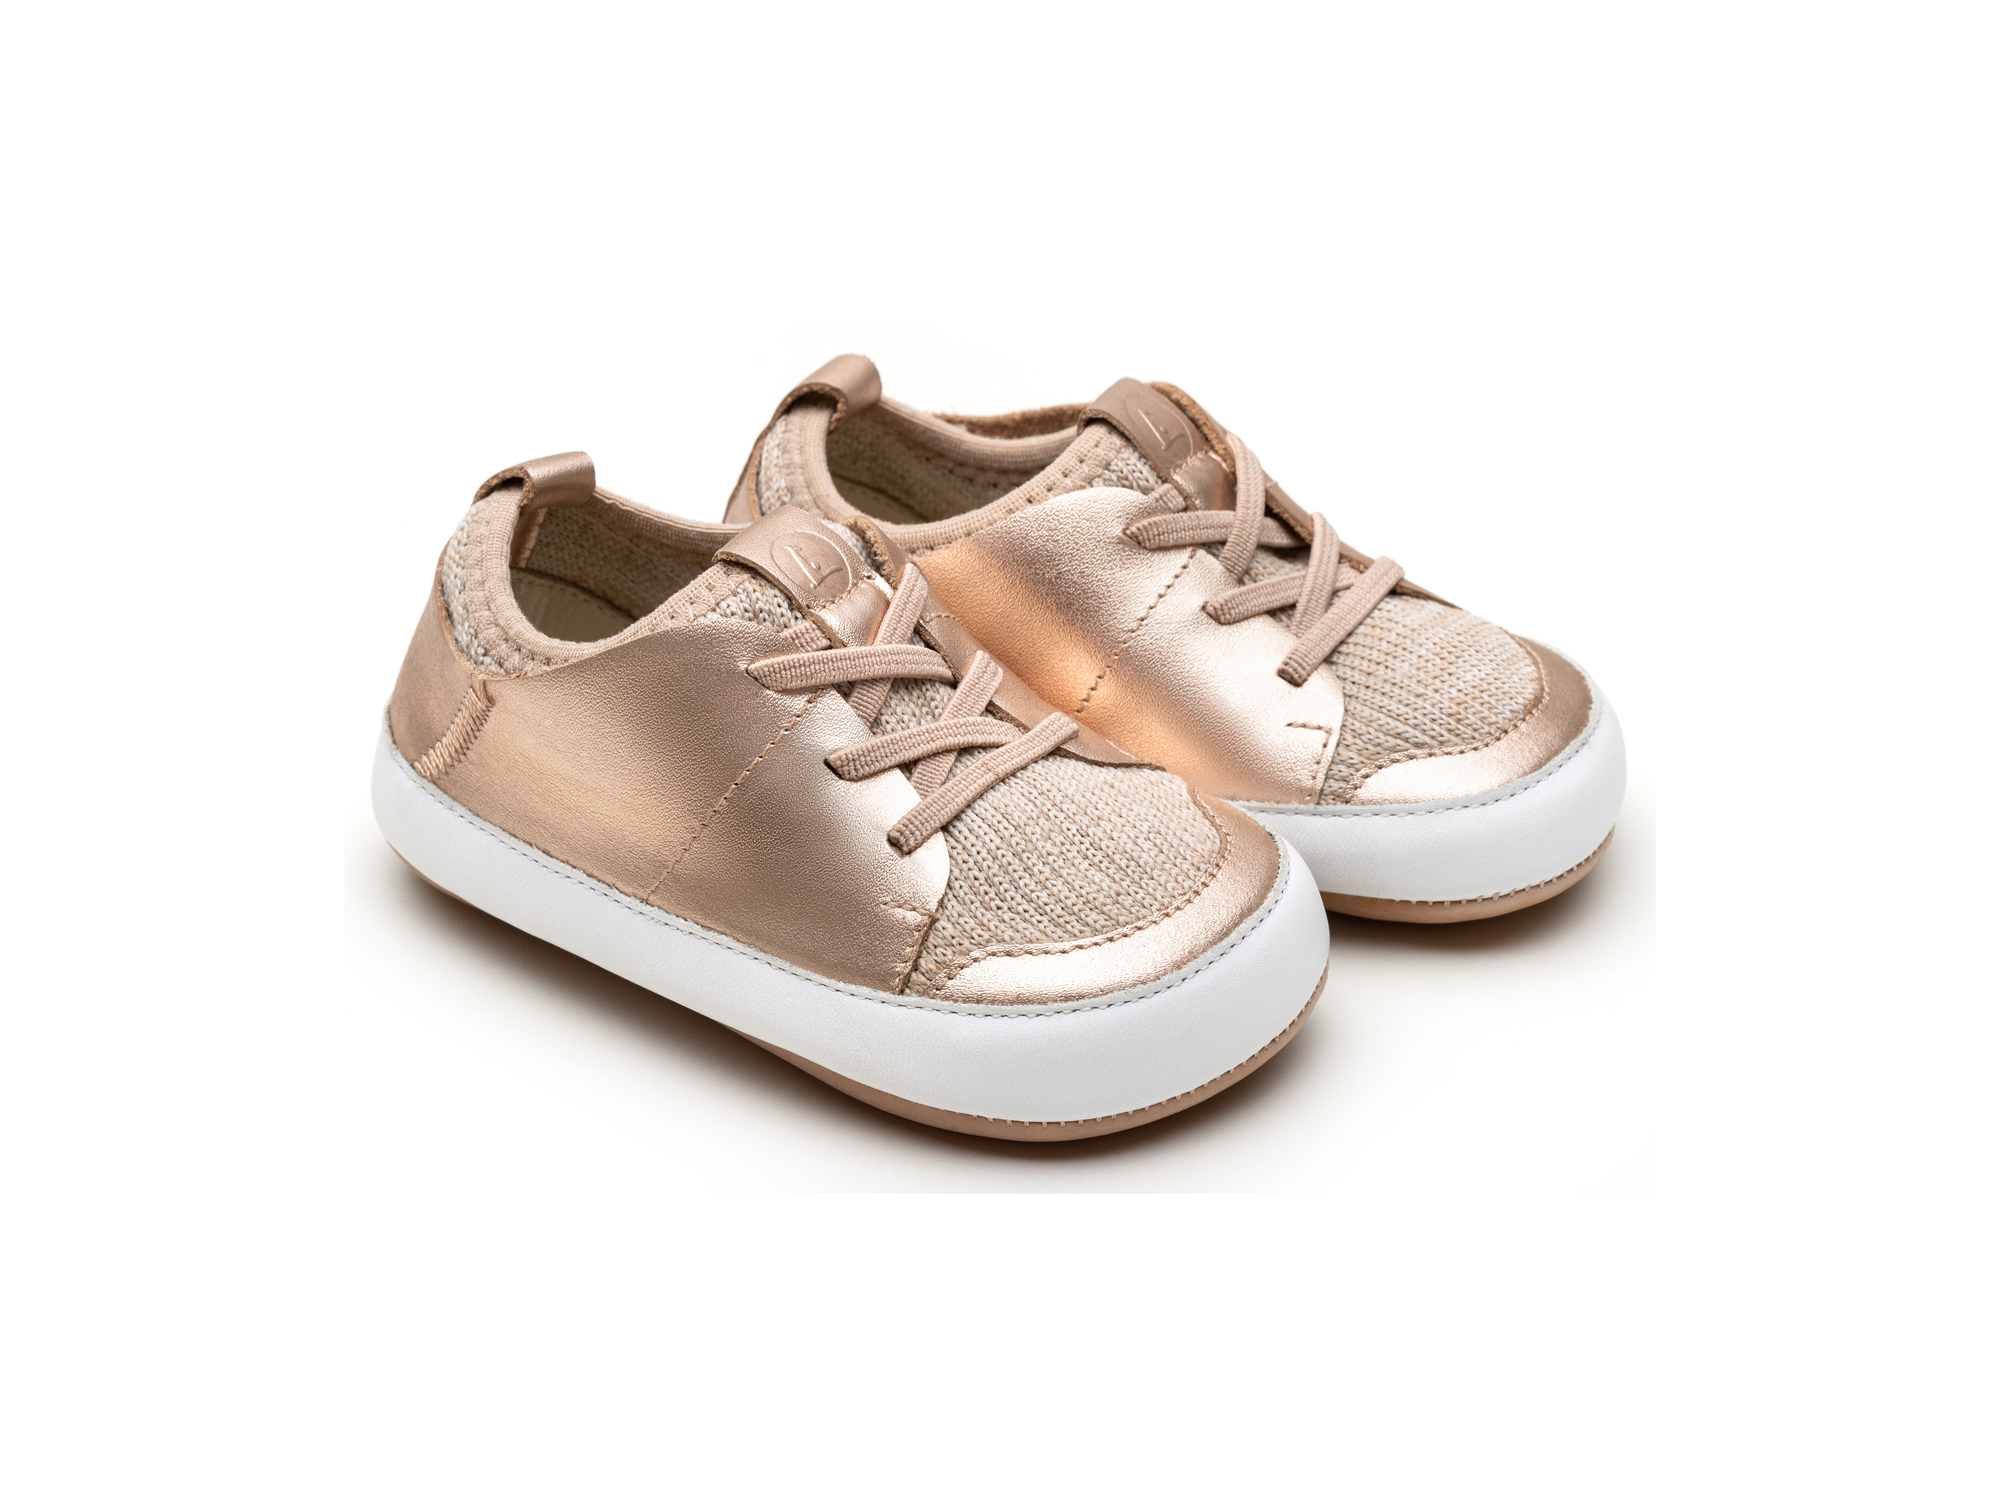 UP & GO Sneakers for Girls Snuggy | Tip Toey Joey - Australia - 4